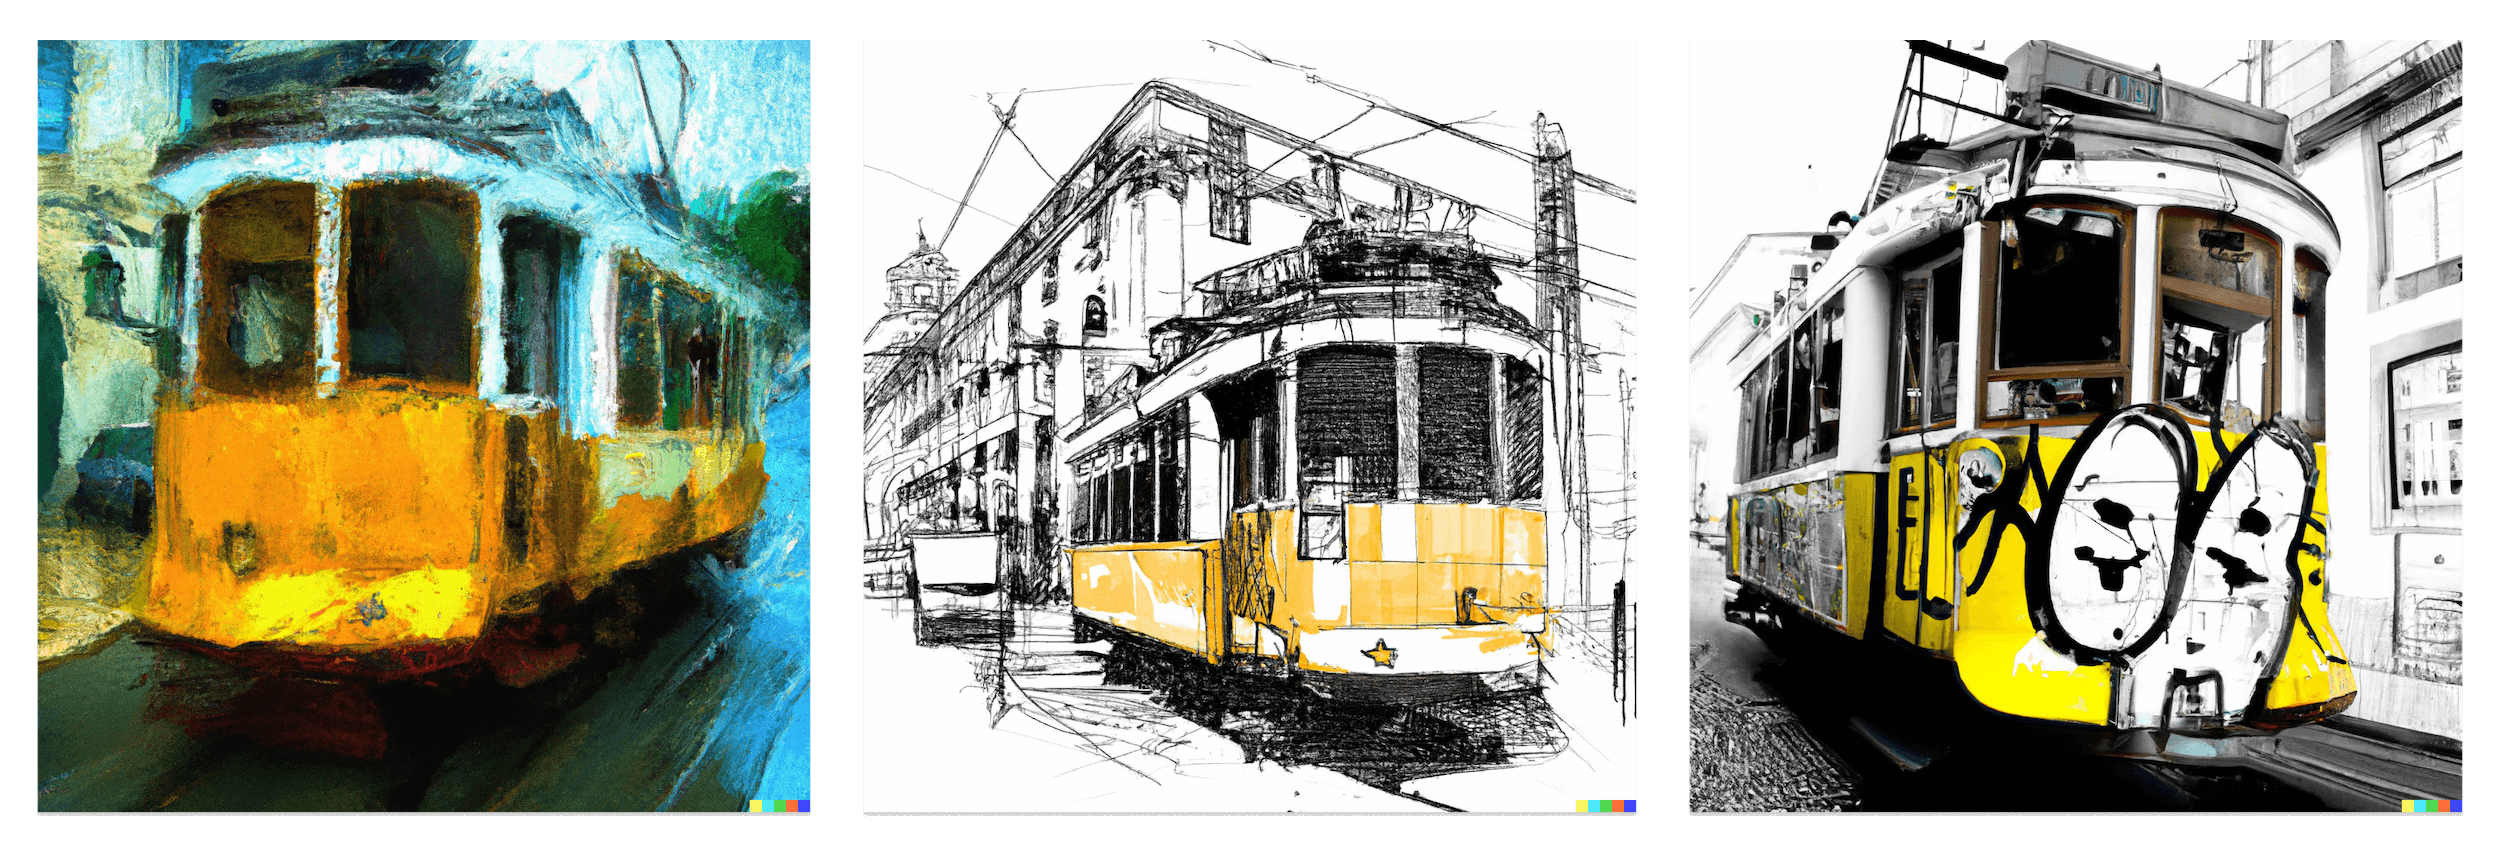 Three photos of the iconic yellow trams from the streets of Lisbon, in varying art styles